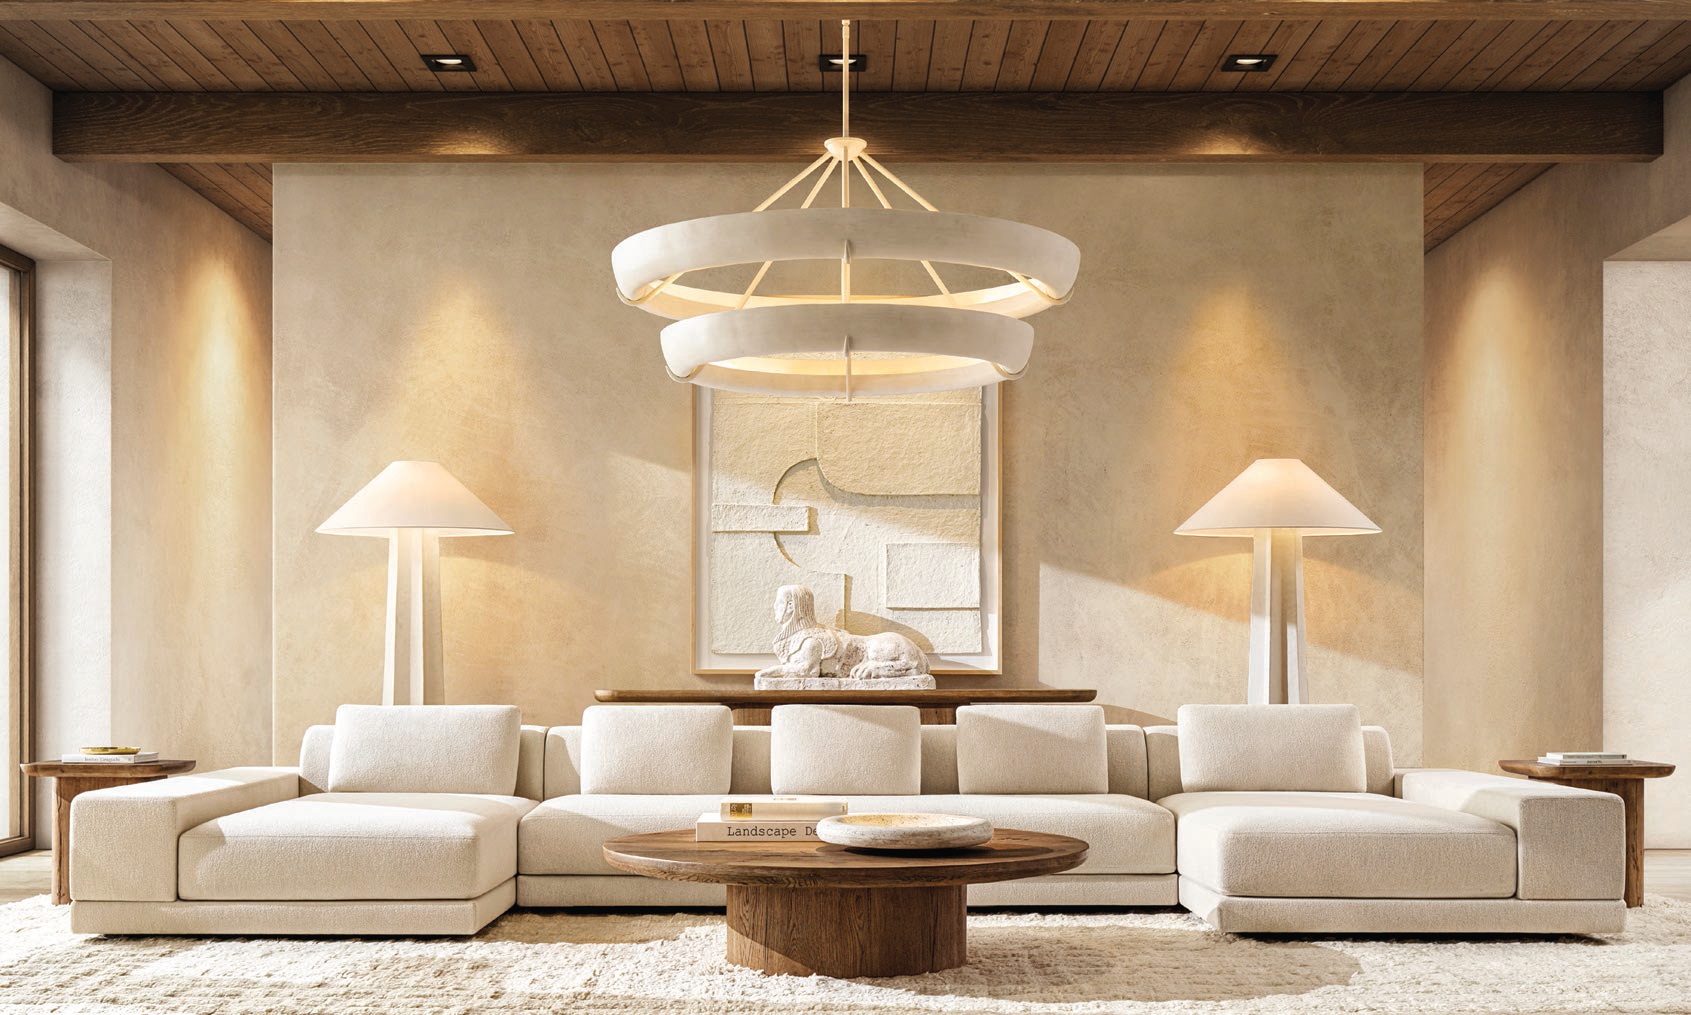 RH Contemporary Cortona sectional sofa and Seine Two-Tier round chandelier by Ryan Korban. PHOTO COURTESY OF BRAND